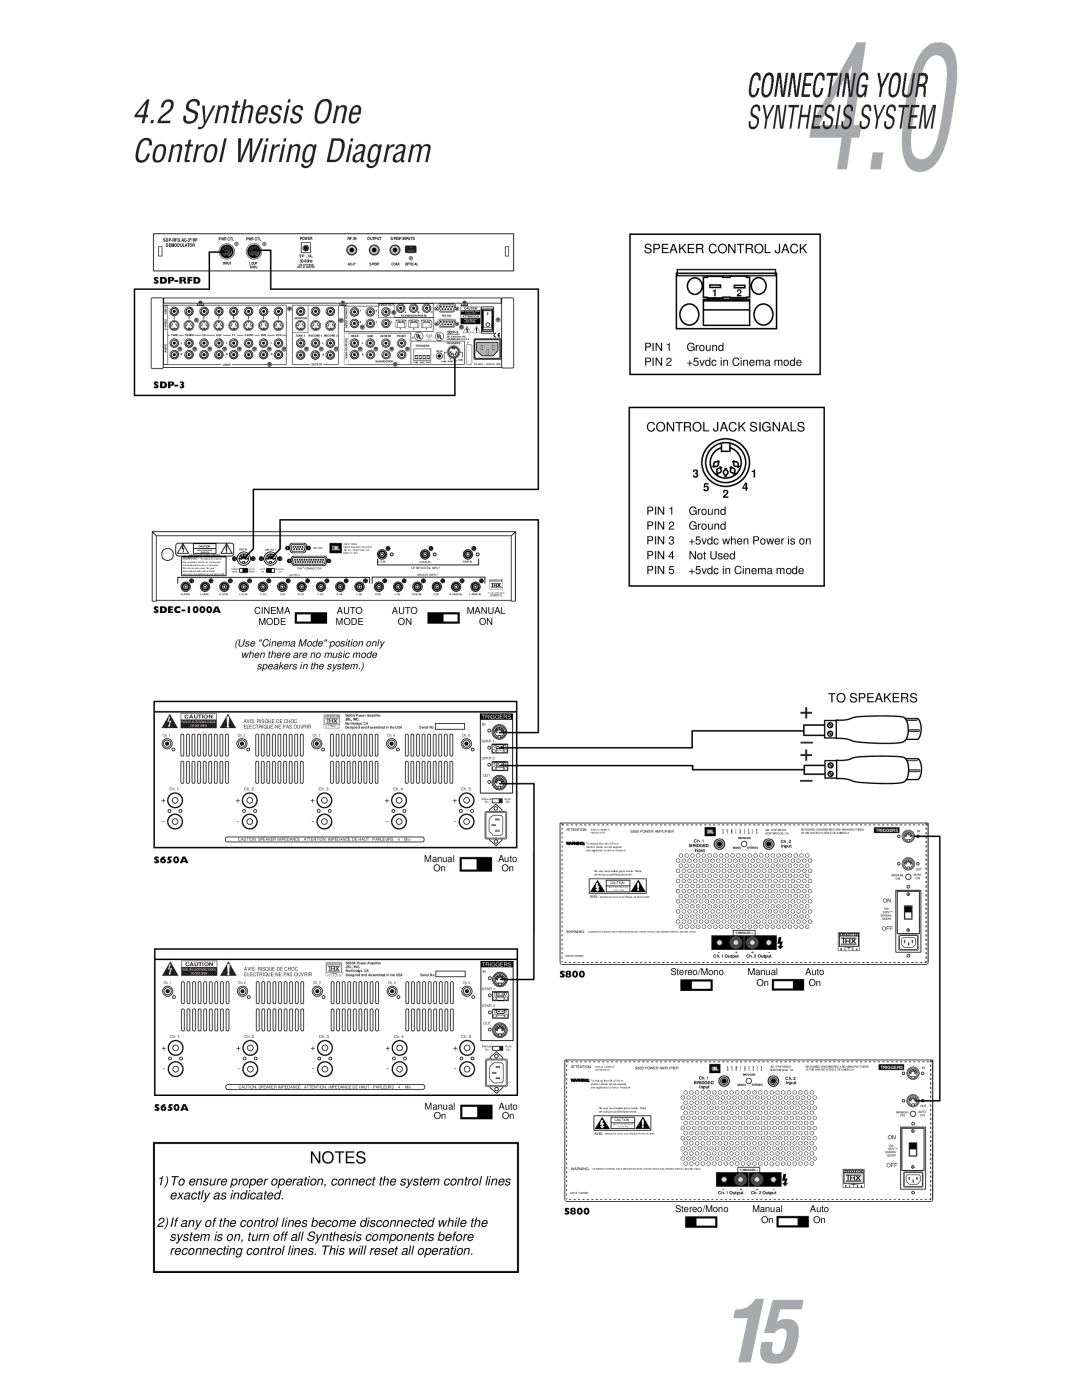 JBL S800 user manual 4.2Synthesis One Control Wiring Diagram, Synthesis System, Notes, To Speakers 